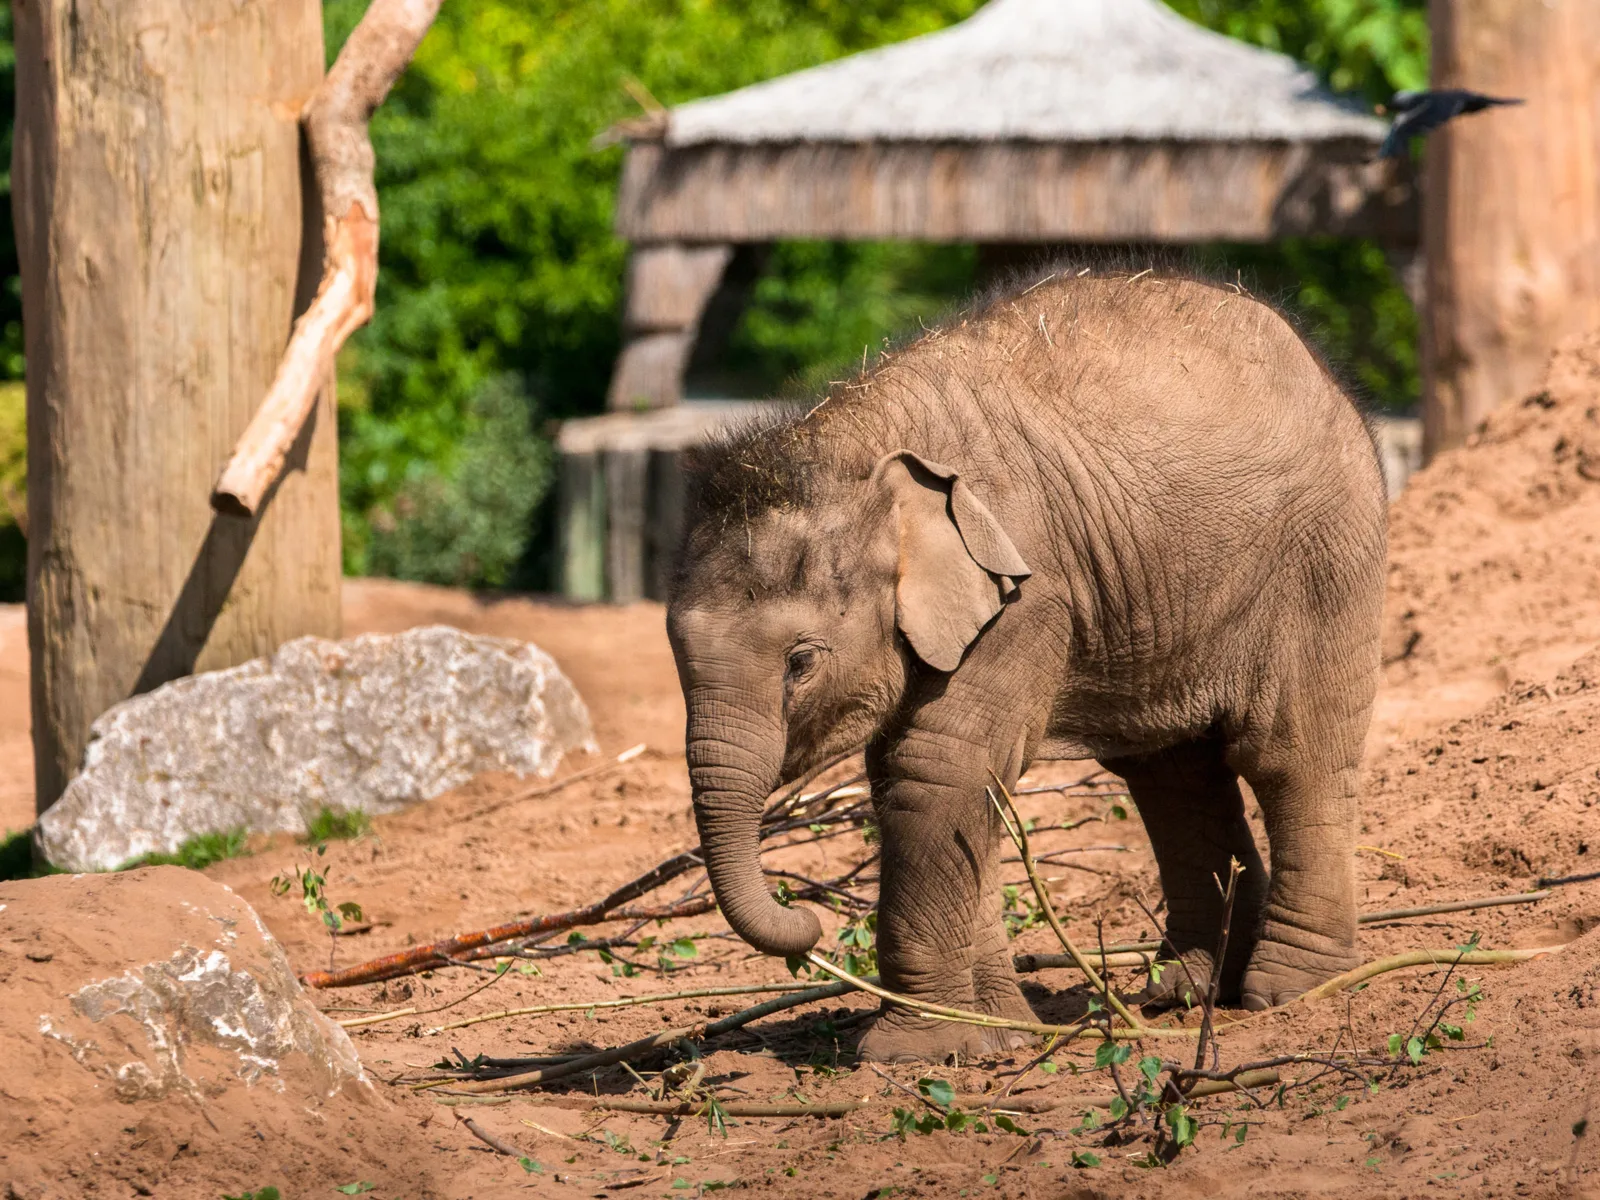 Baby elephant at the Chester Zoo, one of the best zoos in the world